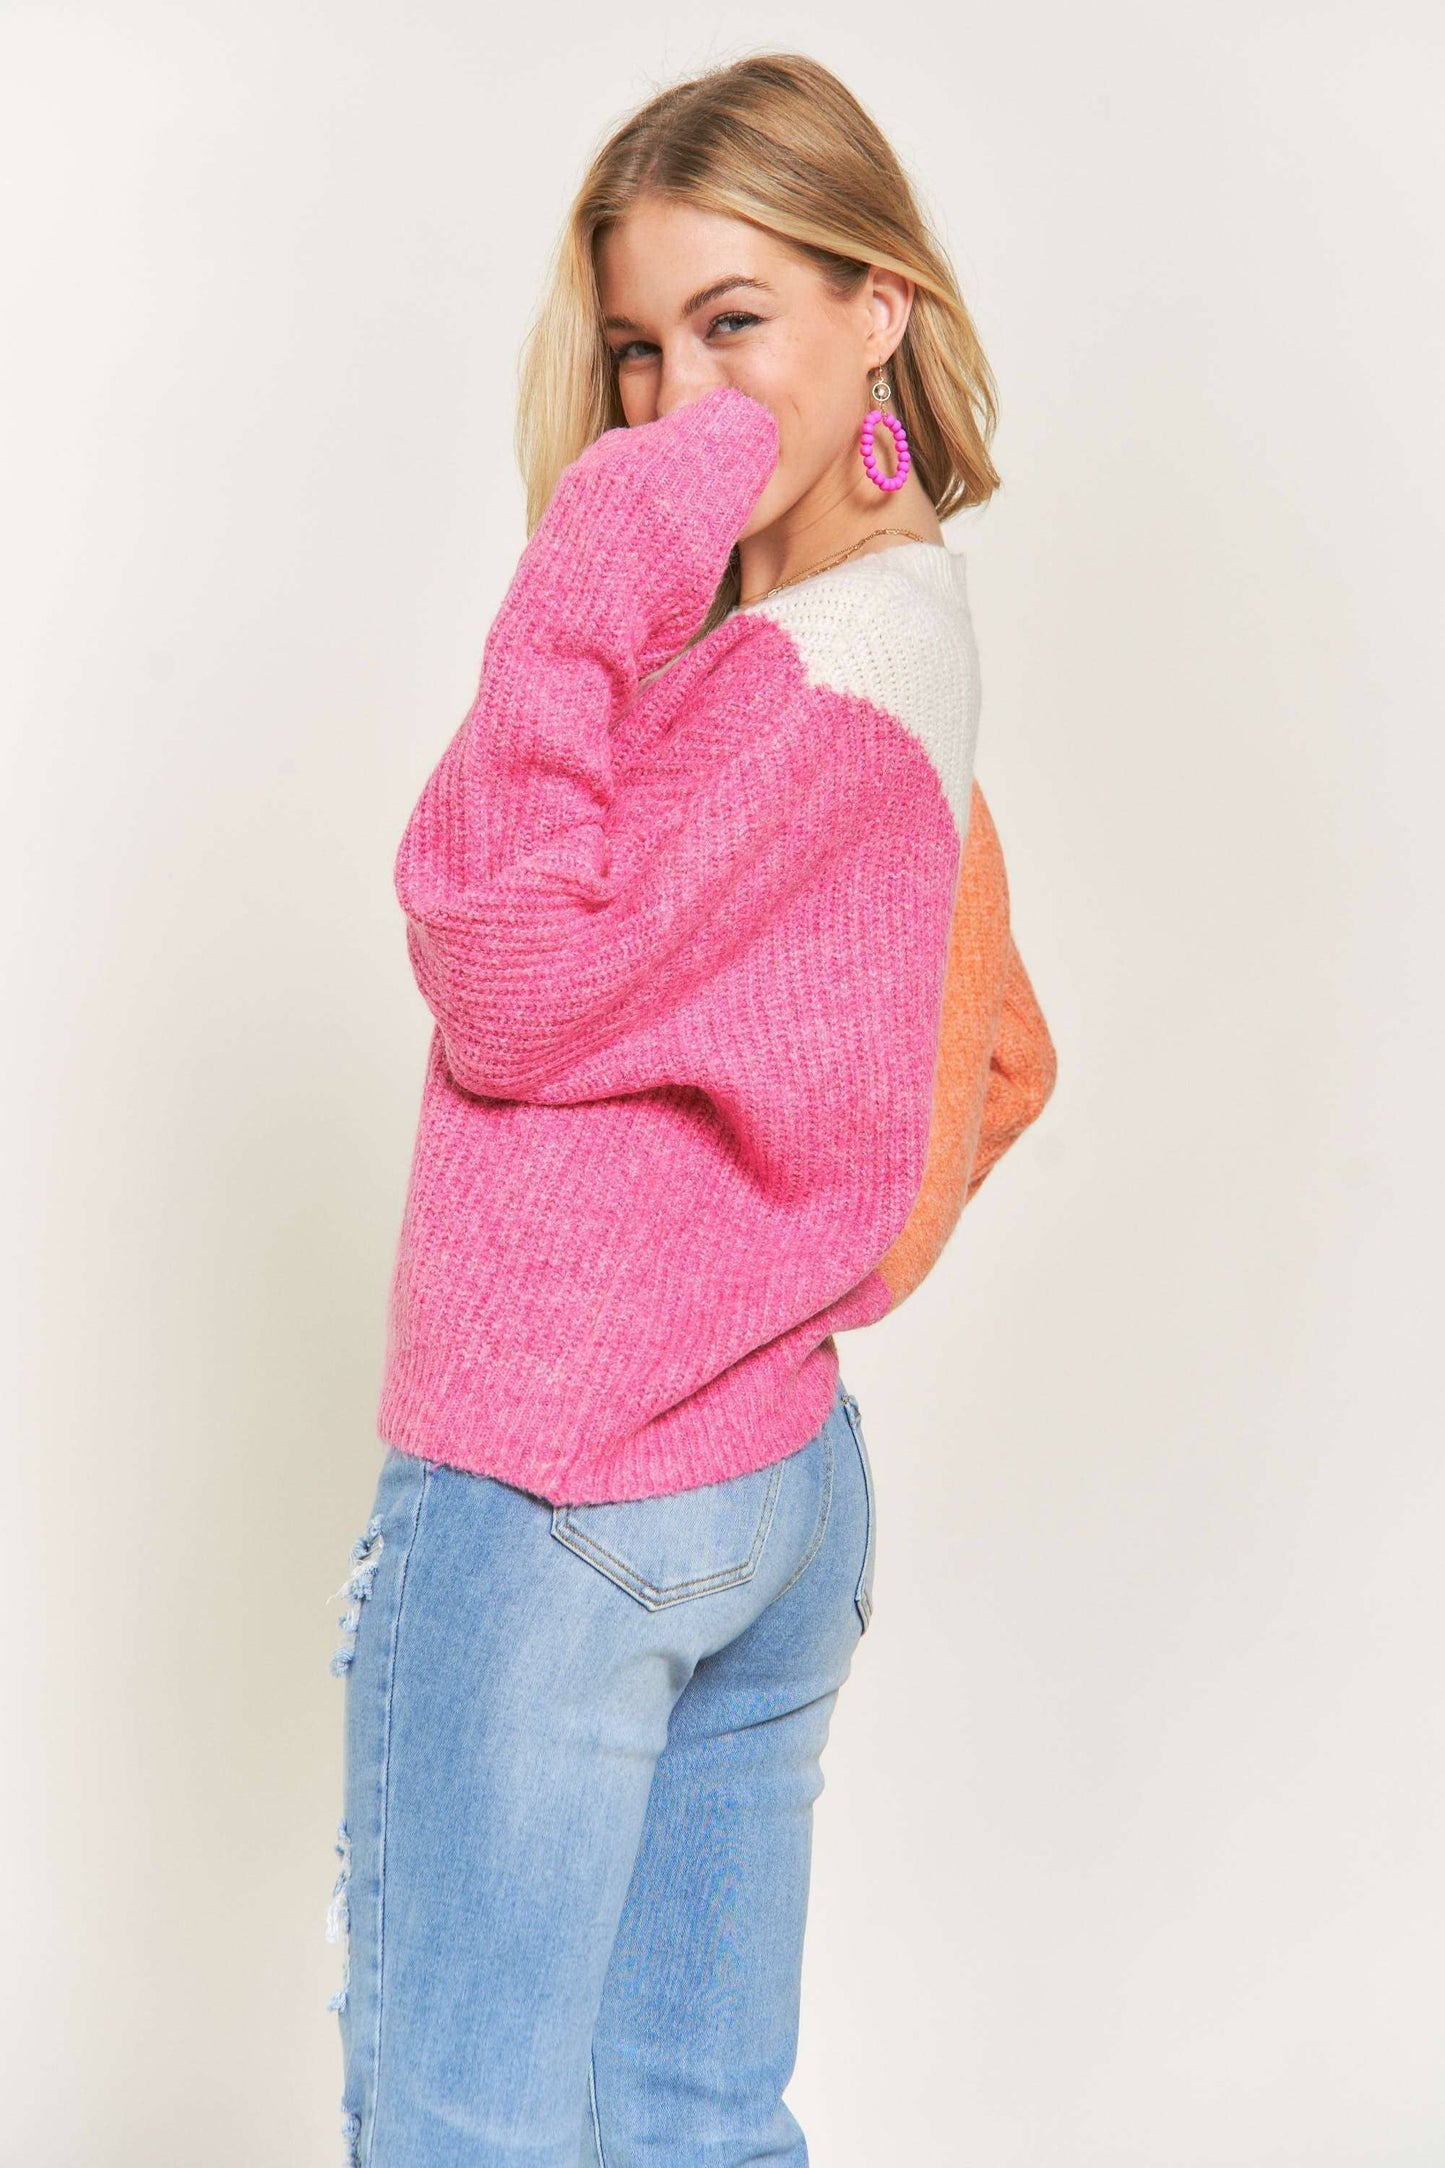 ORANGE AND PINK COLOR BLOCK COMFY SWEATER TOP